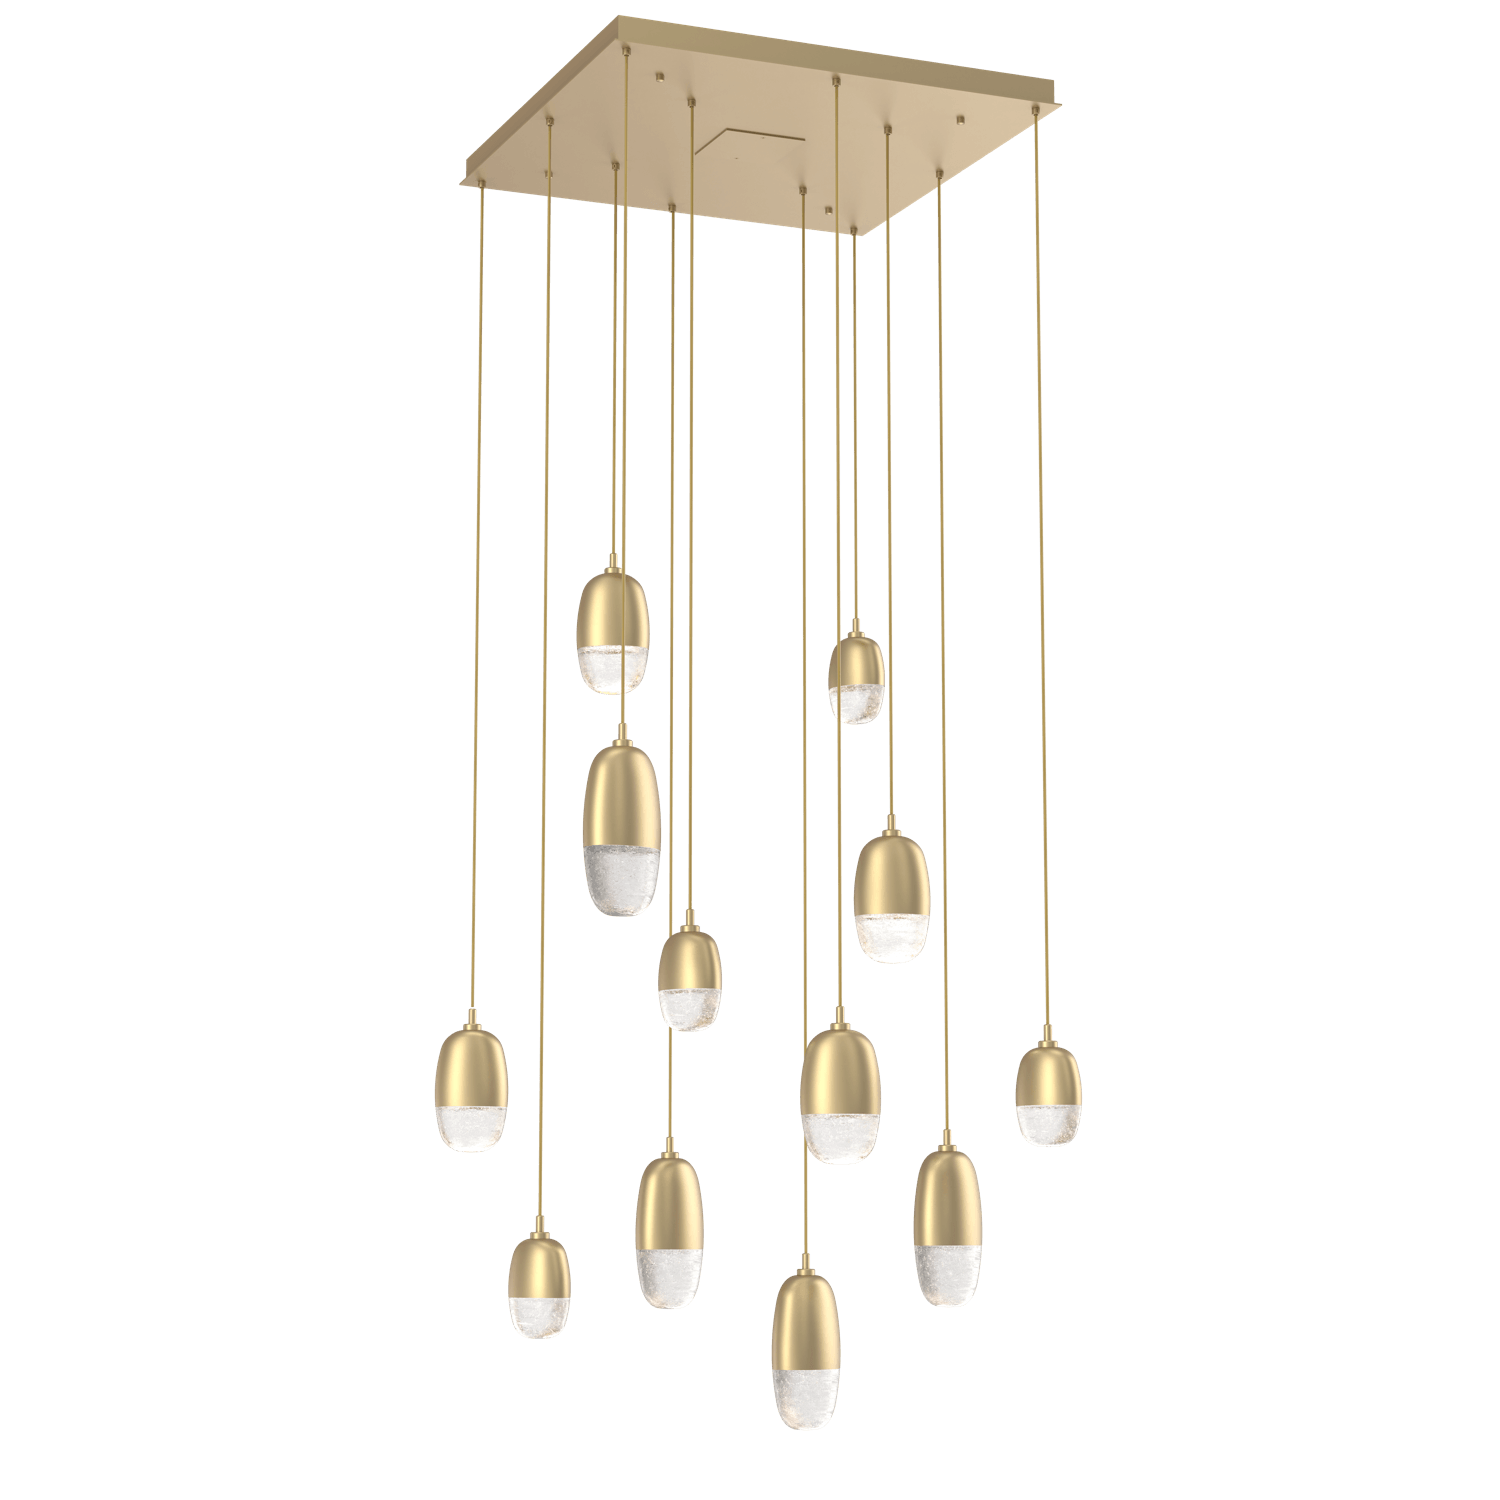 CHB0079-12-GB-Hammerton-Studio-Pebble-12-light-square-pendant-chandelier-with-gilded-brass-finish-and-clear-cast-glass-shades-and-LED-lamping